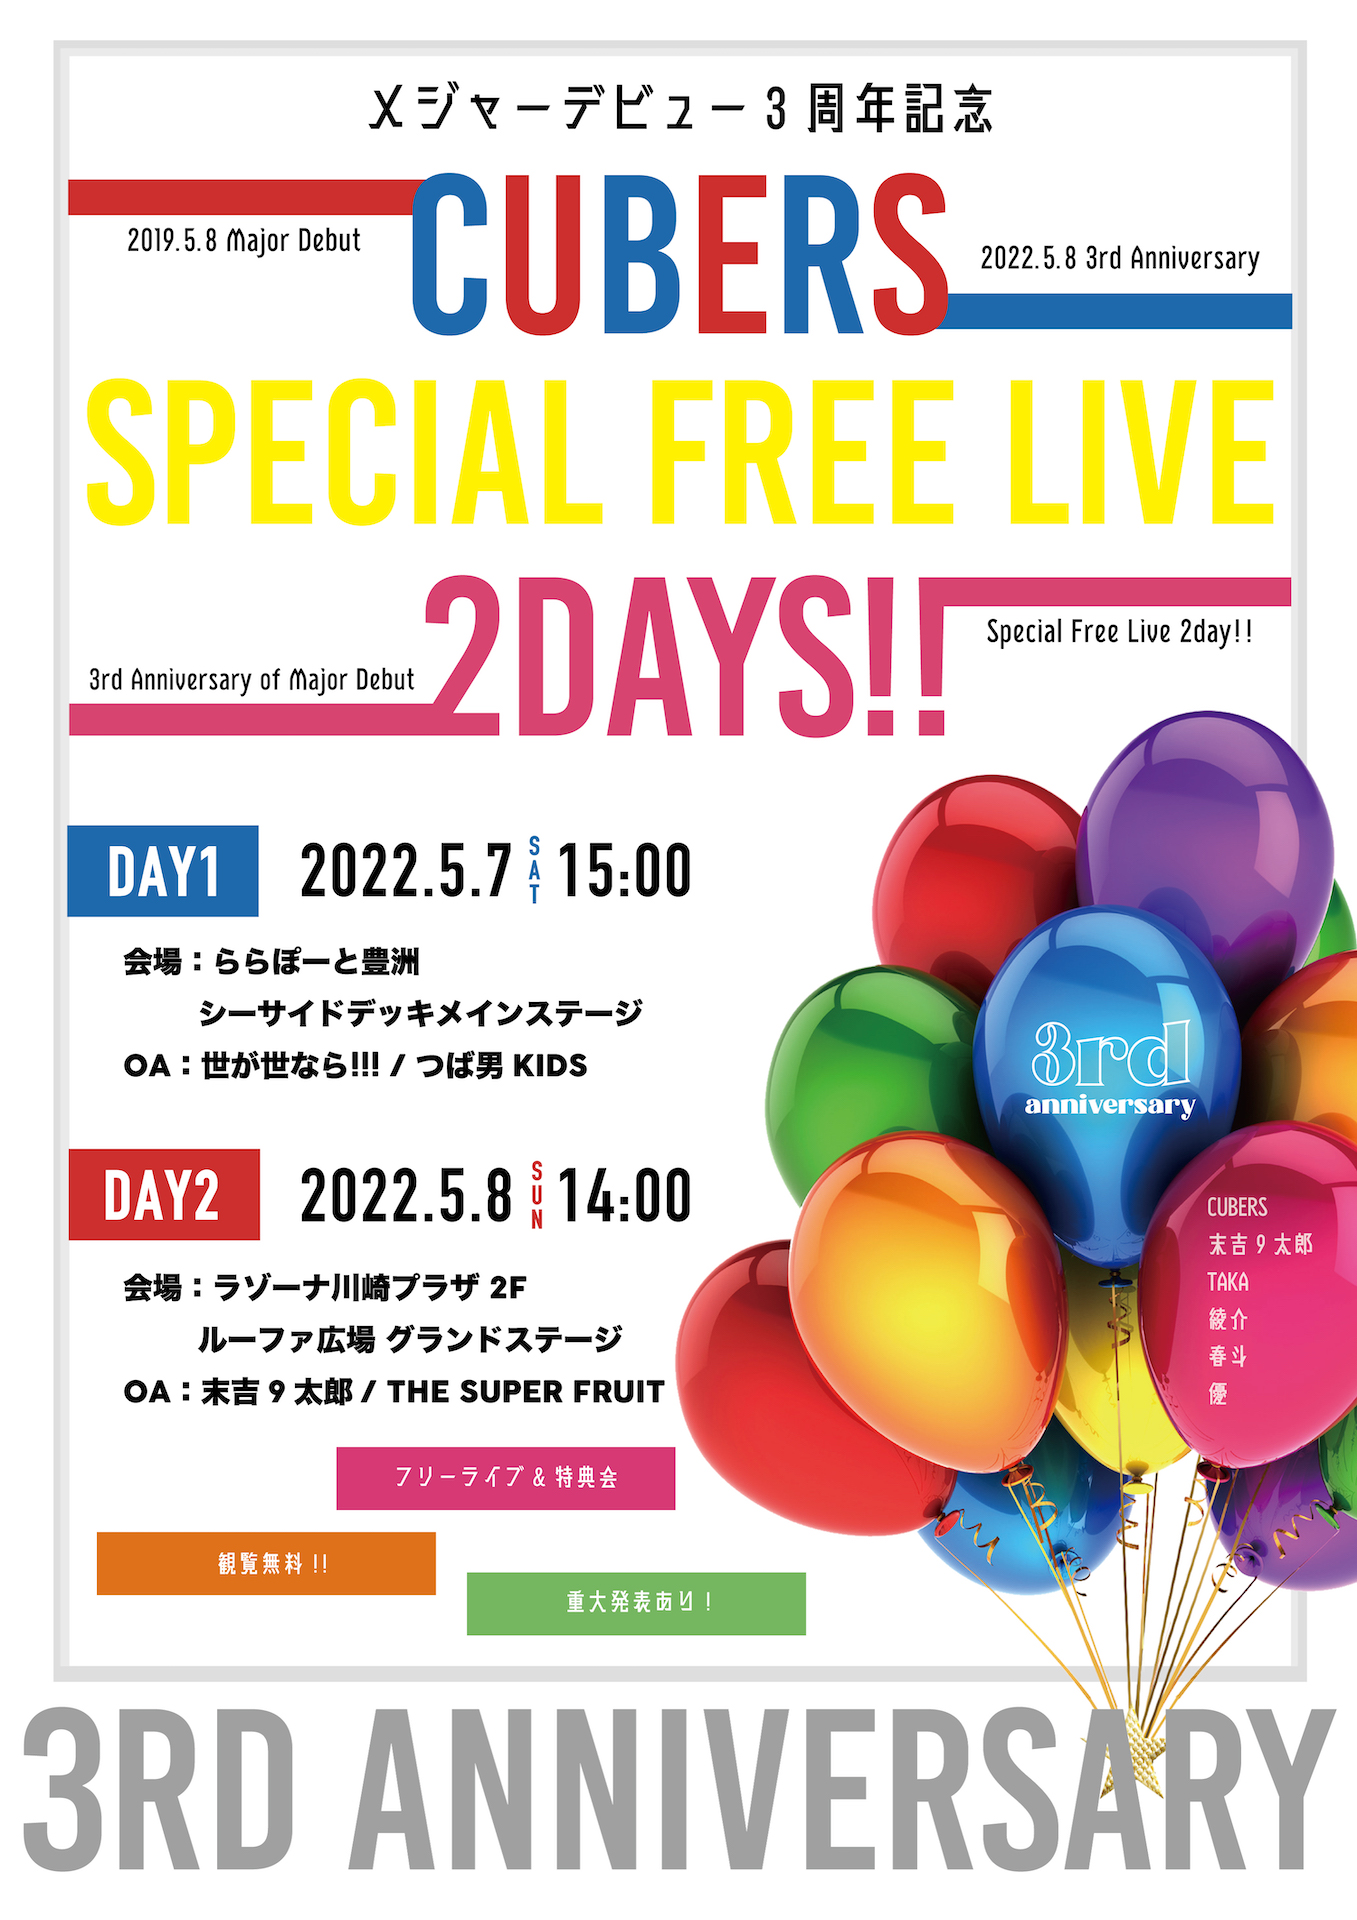 【NEWS】5/7(土)、5/8(日)にメジャーデビュー3周年記念「CUBERS SPECIAL FREE LIVE 2DAYS!!」を開催決定！